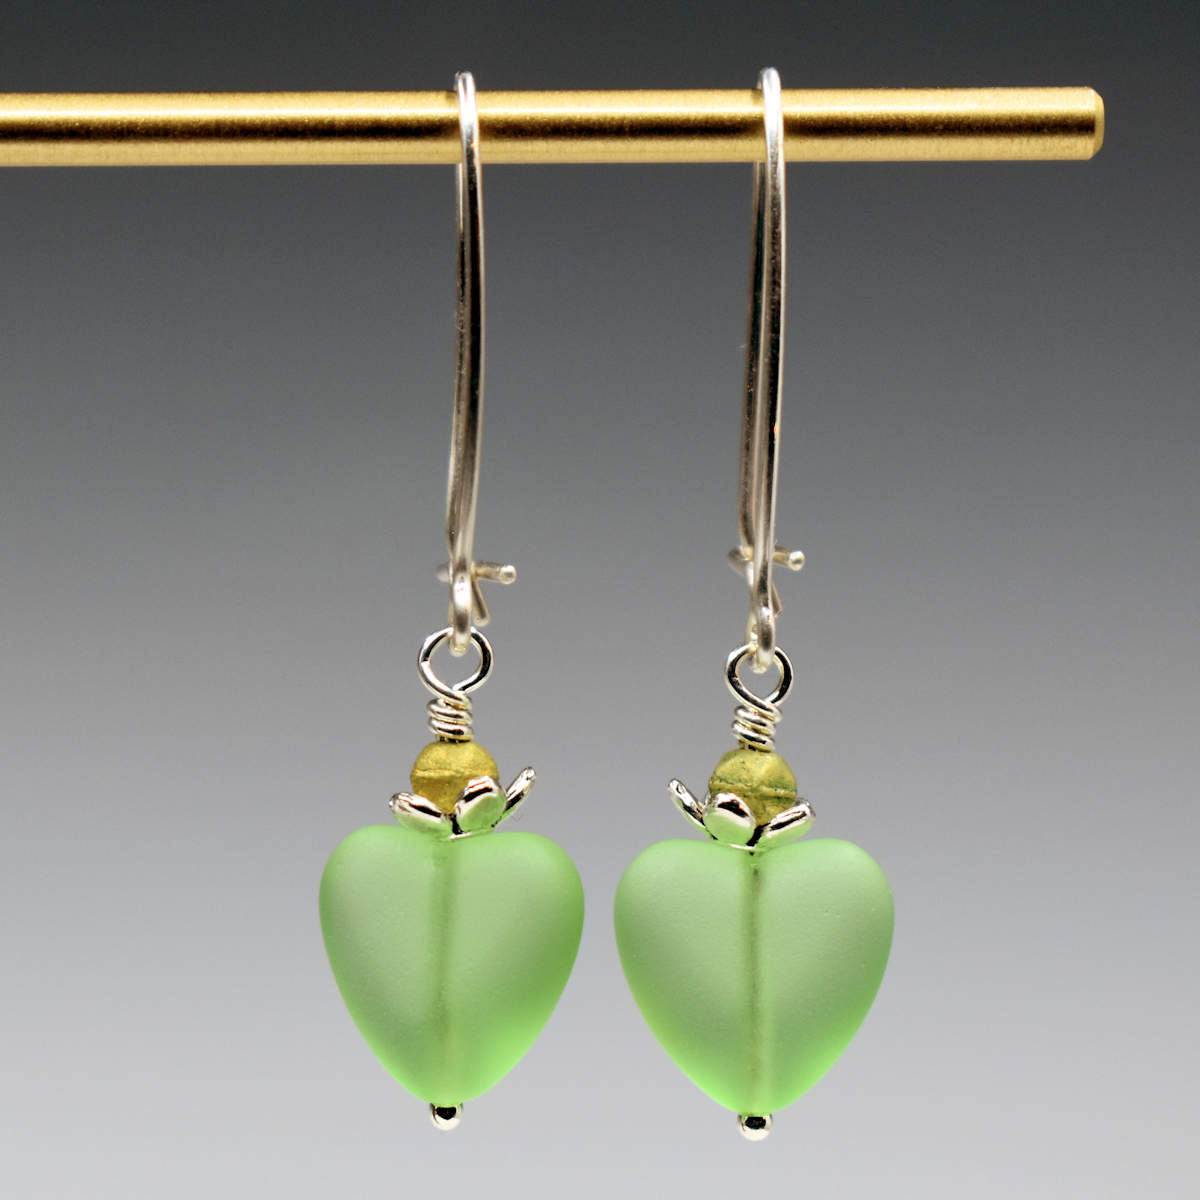 A pair of earrings hang from a gold bar, against a gray background. The earrings have long silver oval wires that latch and small frosted pastel green glass hearts at the bottom.